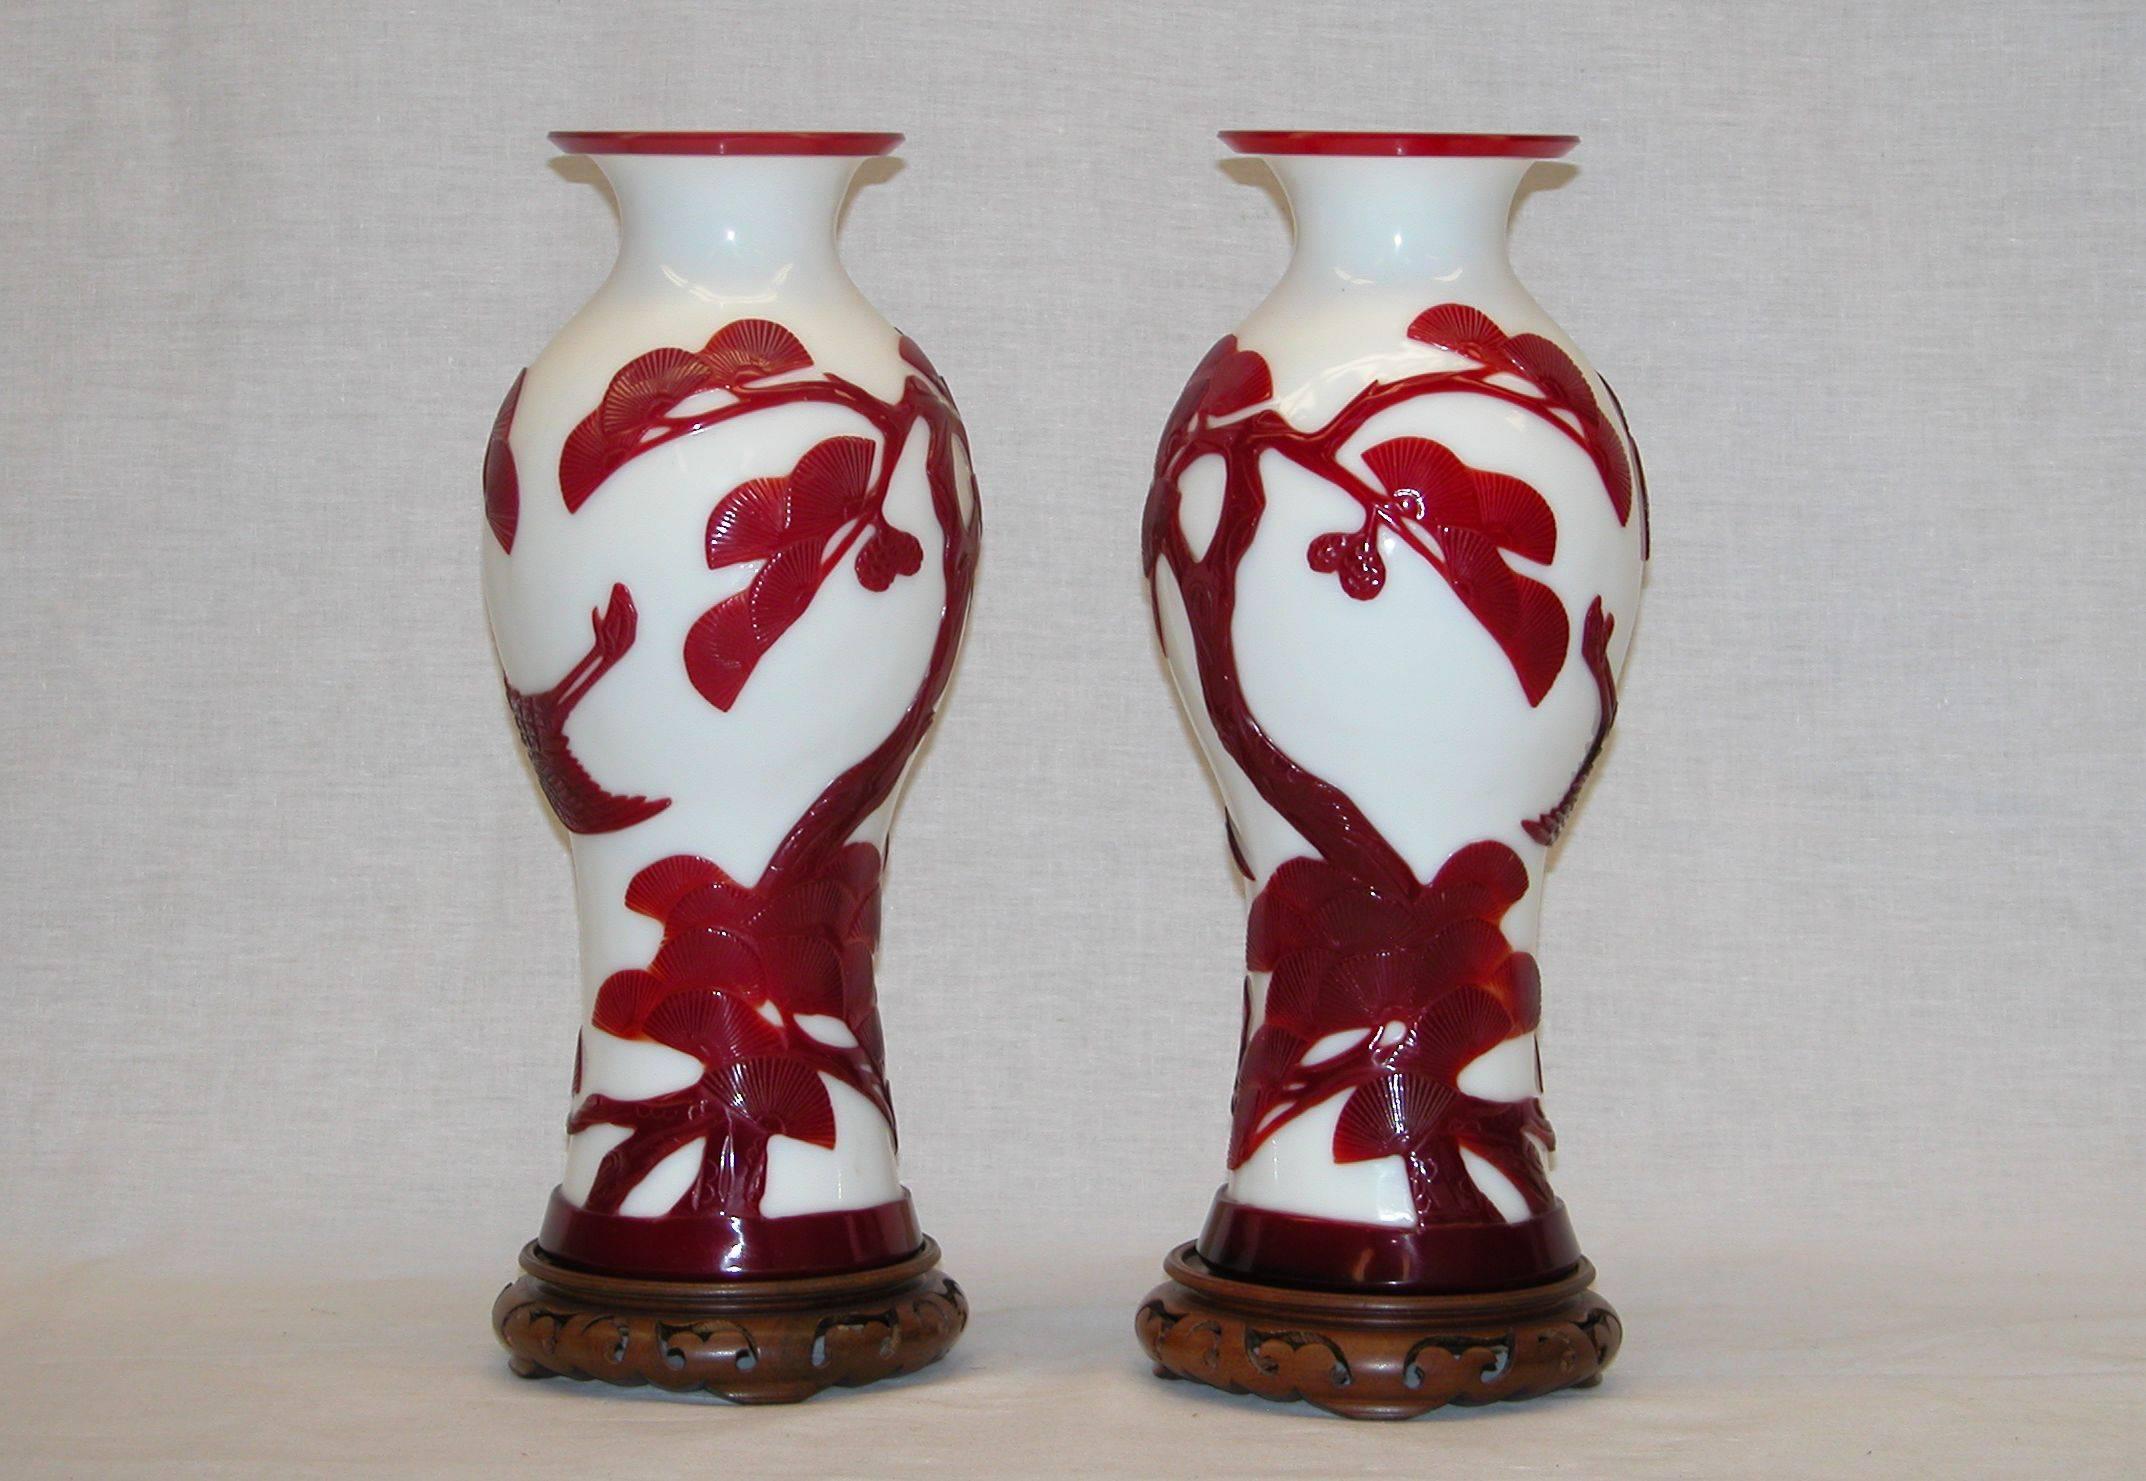 Pair of mint condition glass urns on wooden bases in excellent condition, late 19th century. Red over white glass design including birds in flight and extremely well-done Chinese branches and leaves.